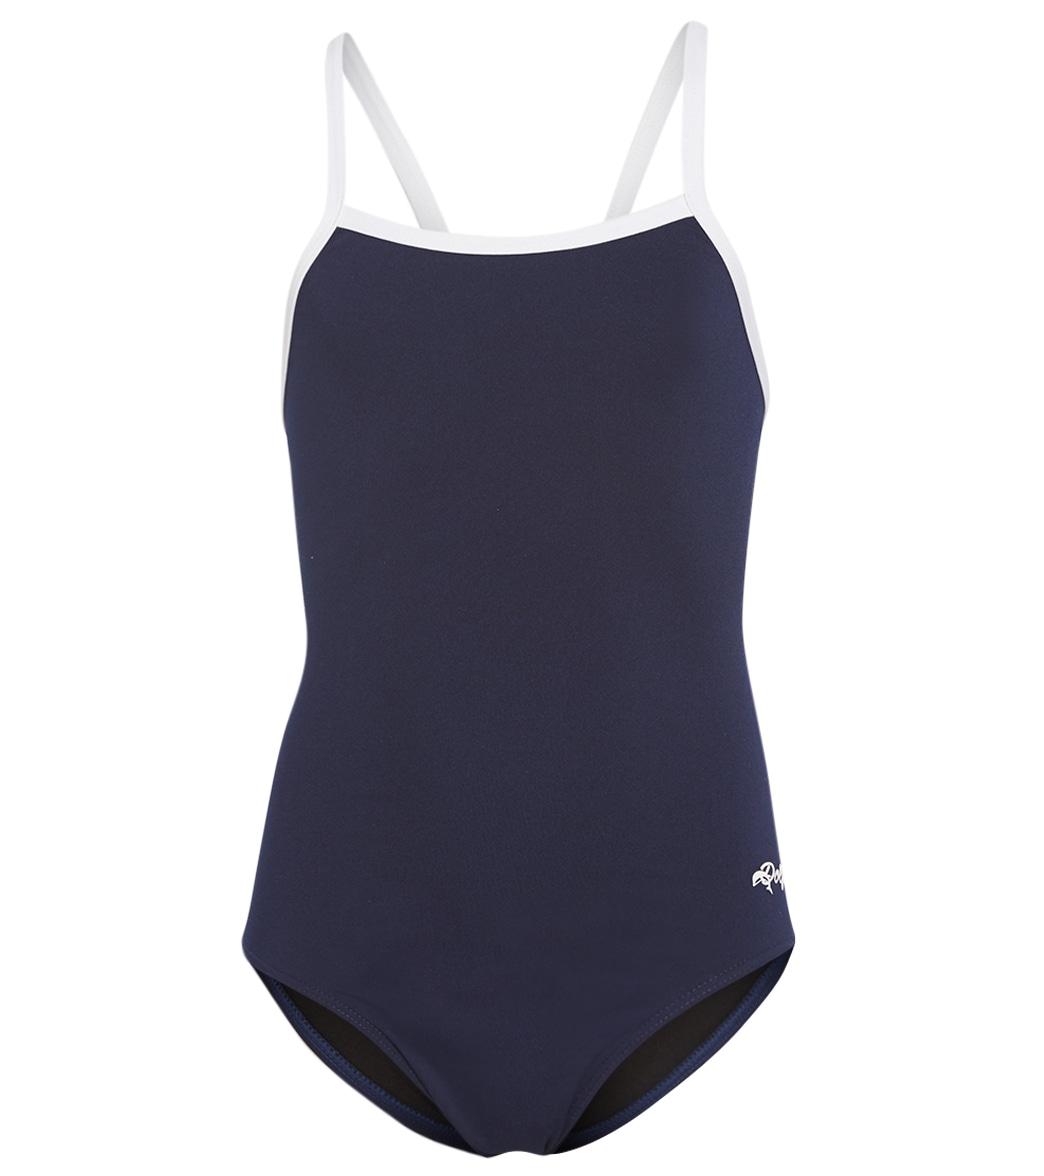 Dolfin All Poly Youth Varsity Solid String Back - Navy/White 24 Swimsuit - Swimoutlet.com